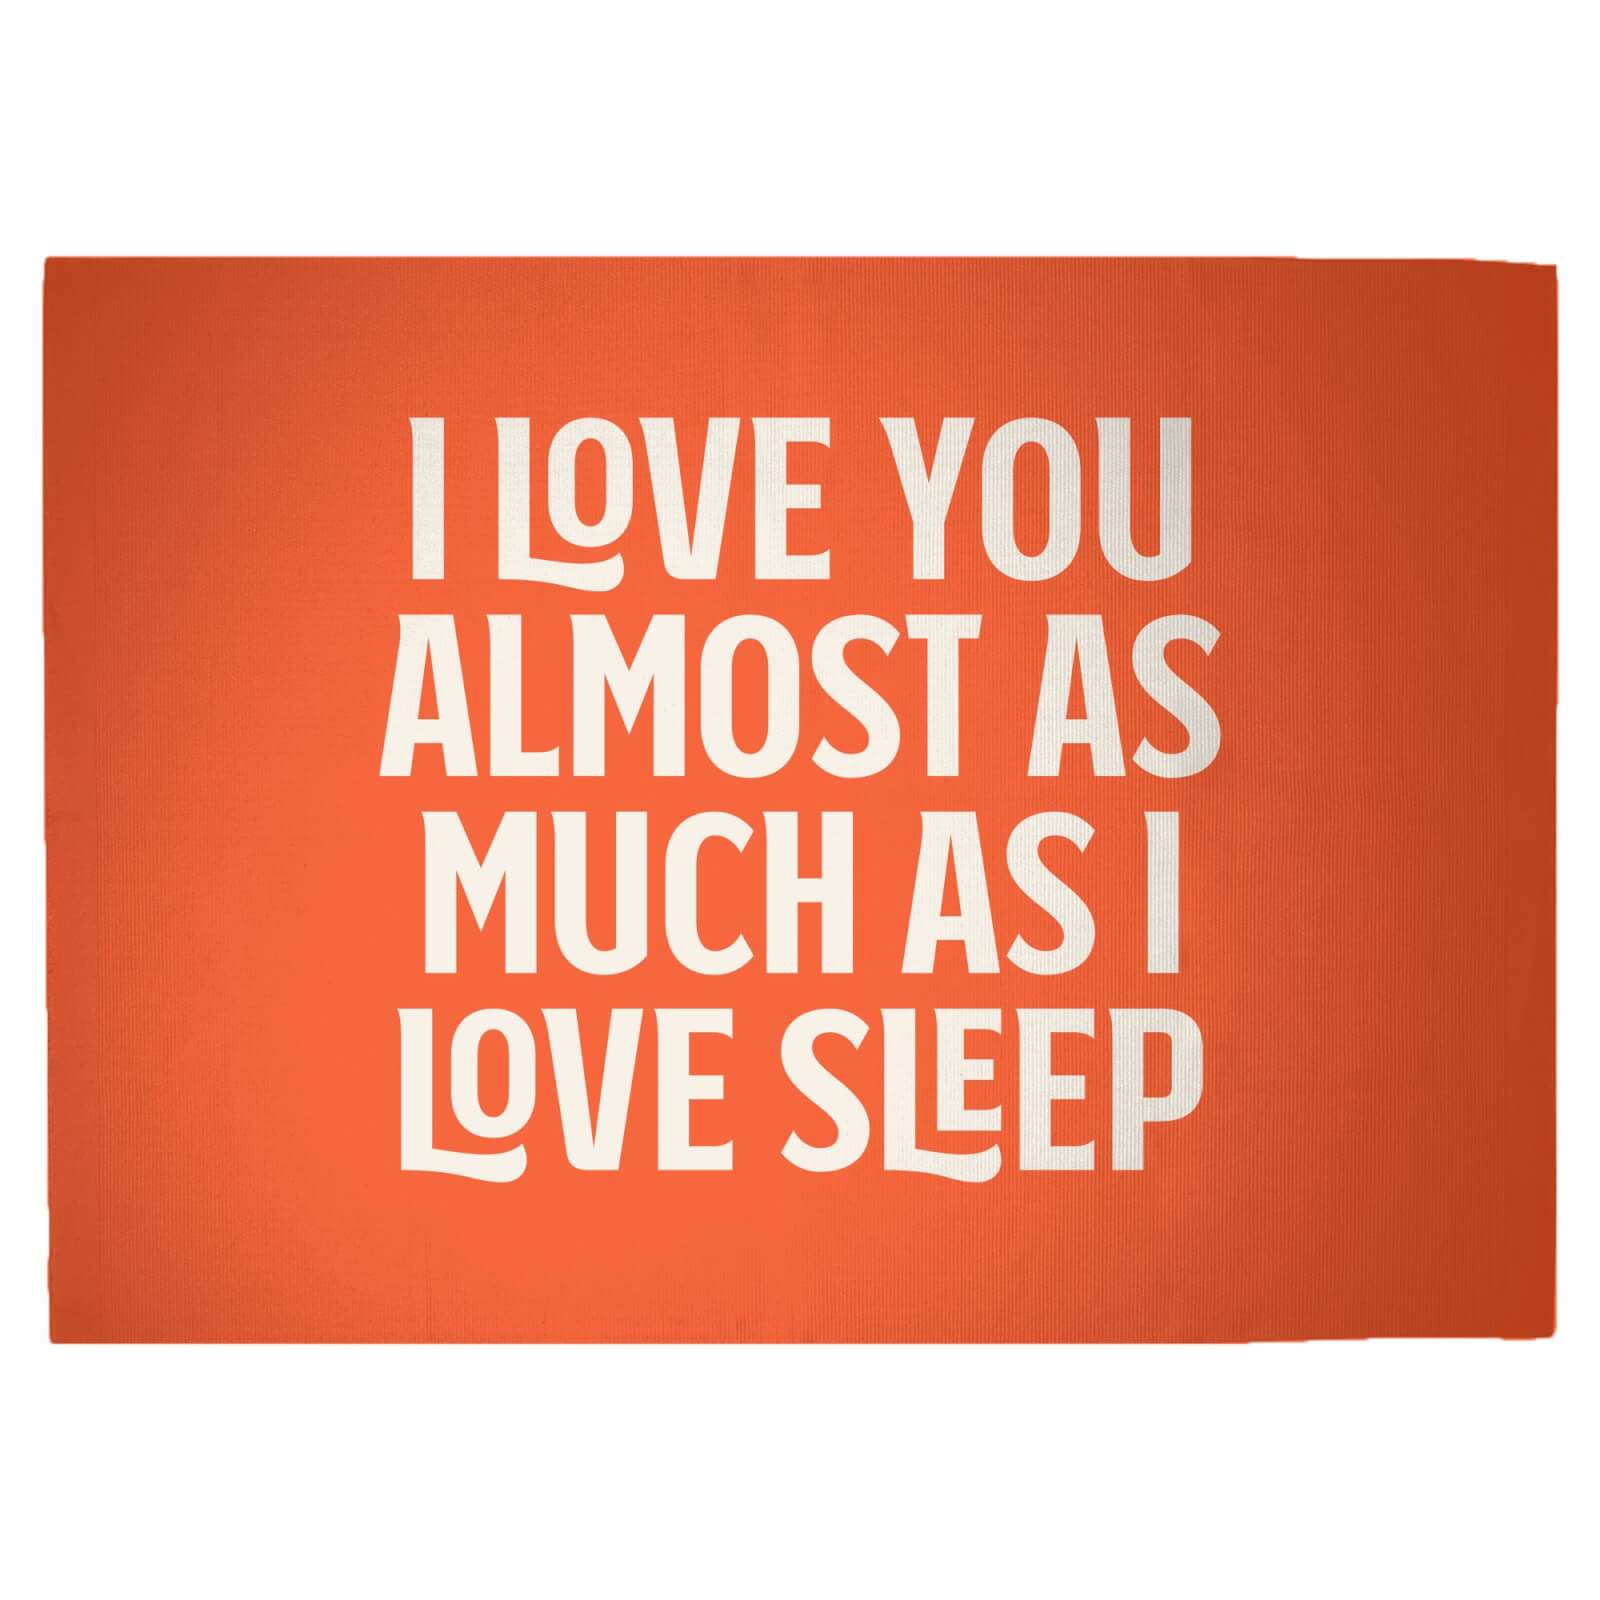 I Love You Almost As Much As I Love Sleep Woven Rug - Large